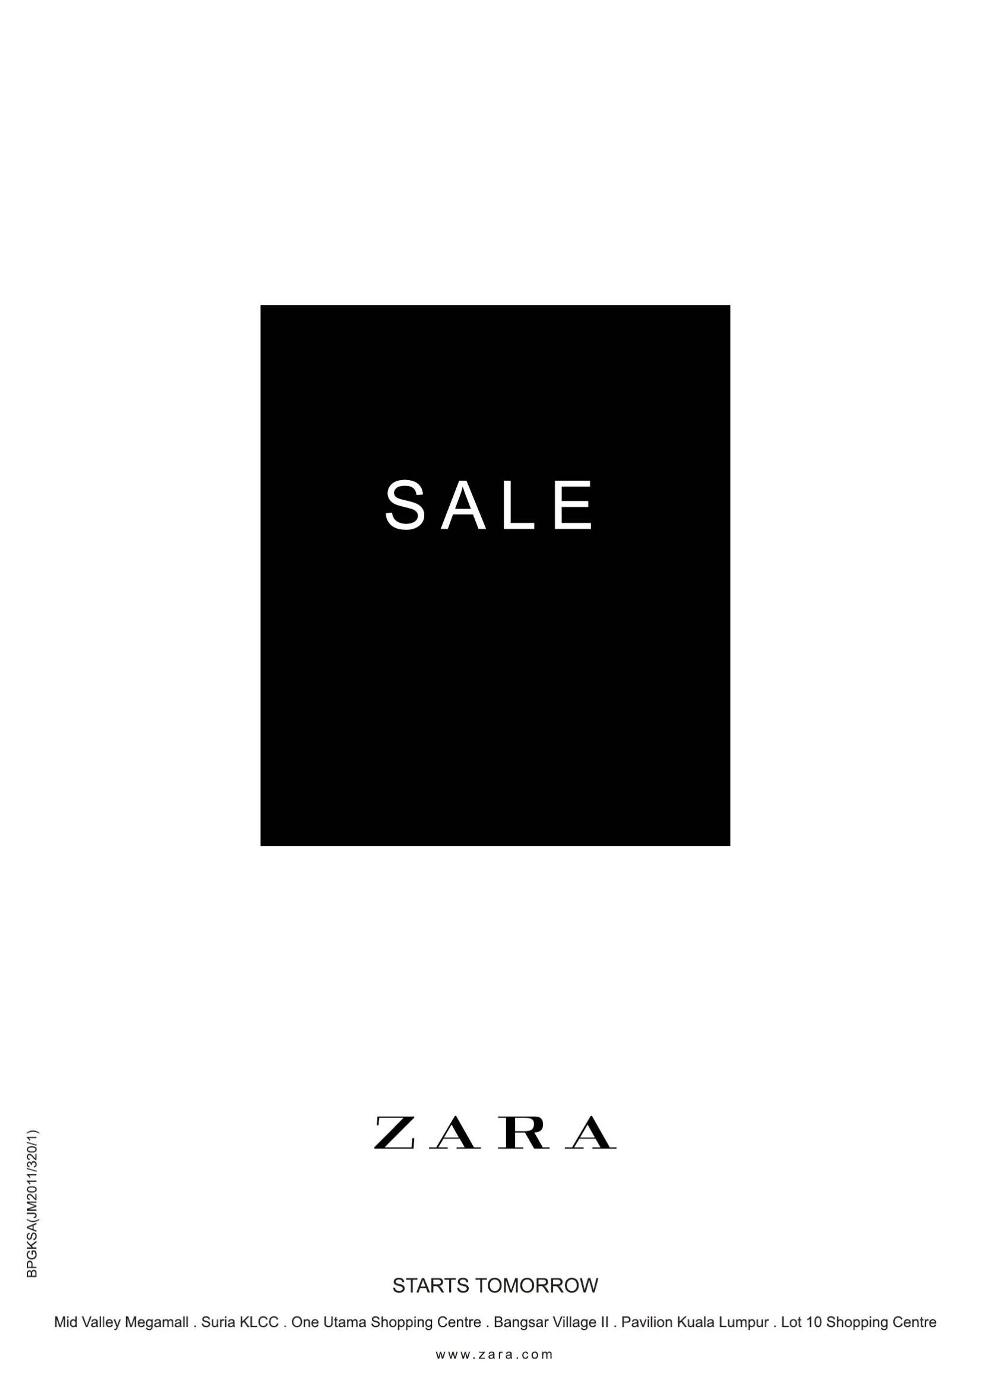 ... zara application online job employment form available positions at